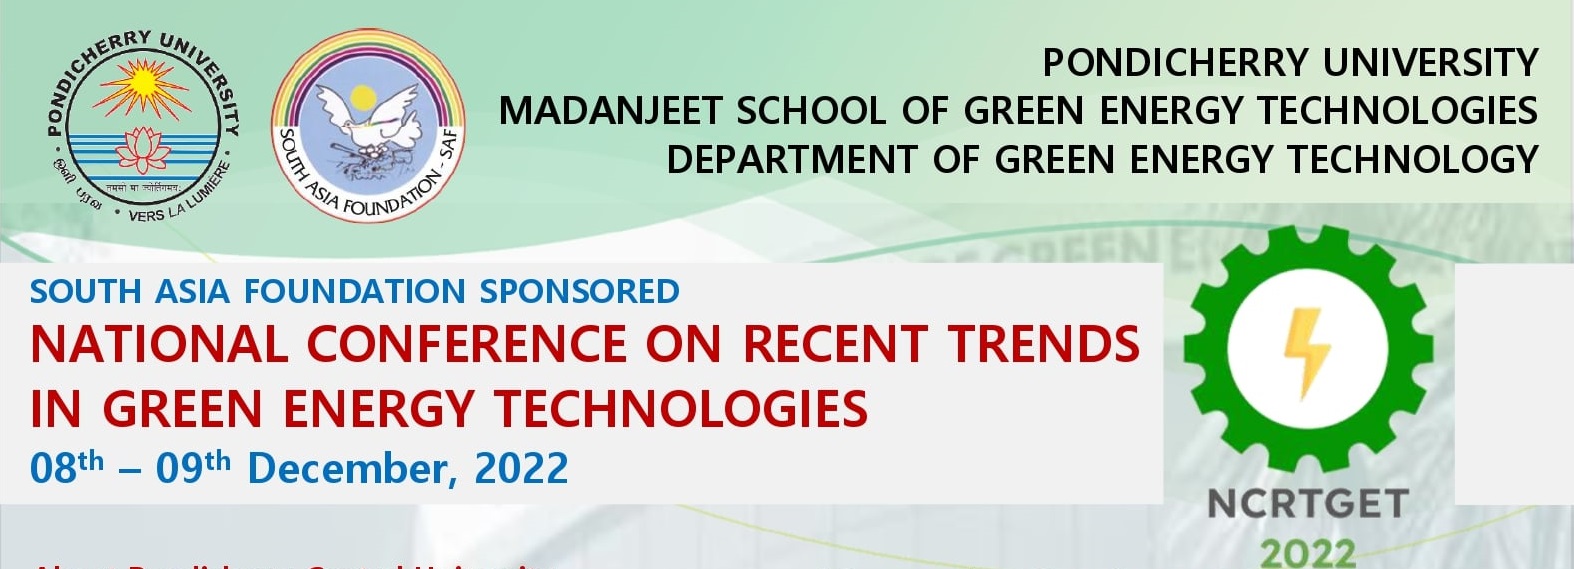 National Conference on Recent Trends in Green Energy Technologies - 2022, Pondicherry, Puducherry, India